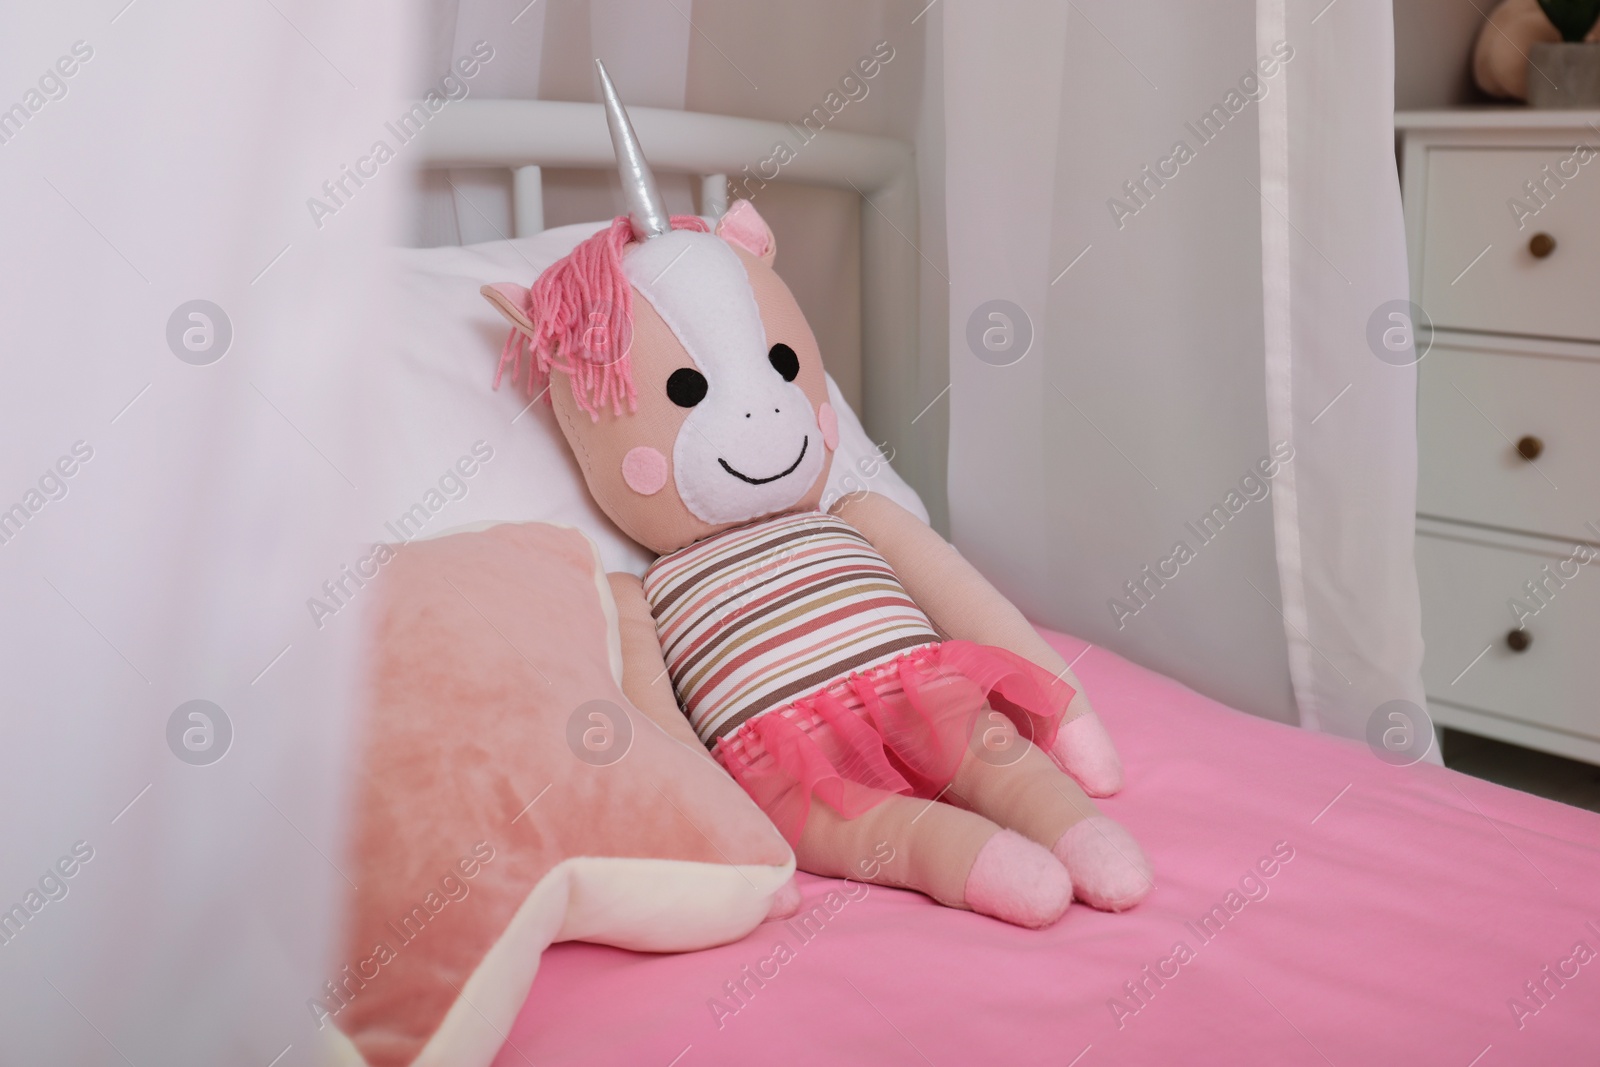 Photo of Soft toy unicorn and star shaped cushion on bed in child's room. Interior design